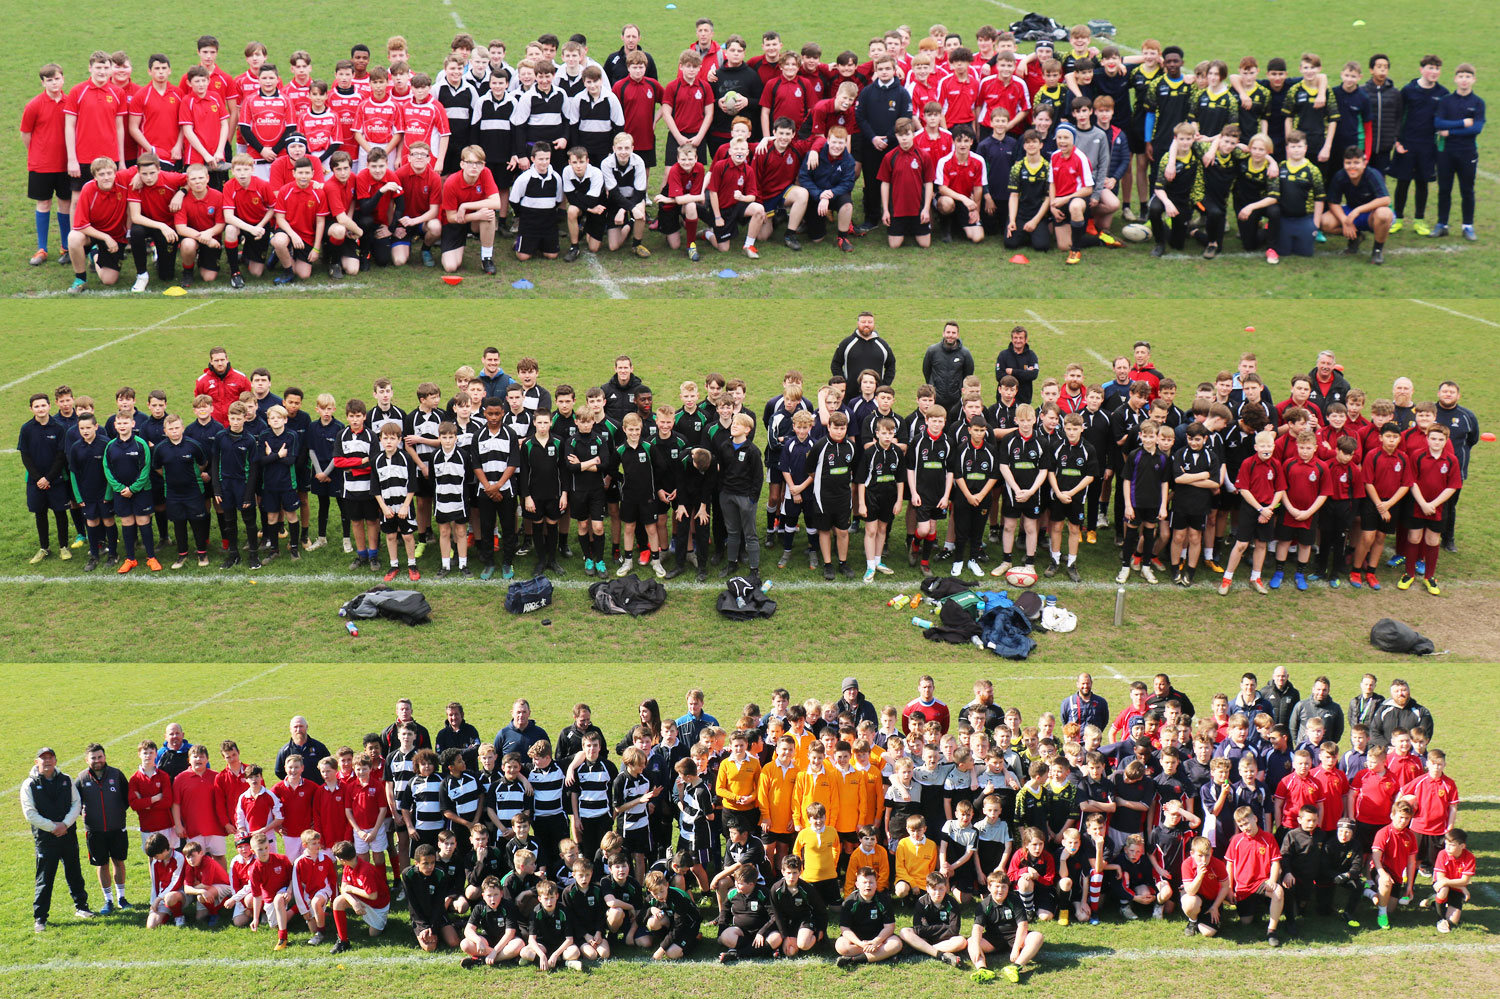 Image of Year 7, 8 and 9 festivals in March 2019, part of the local schools and community programme